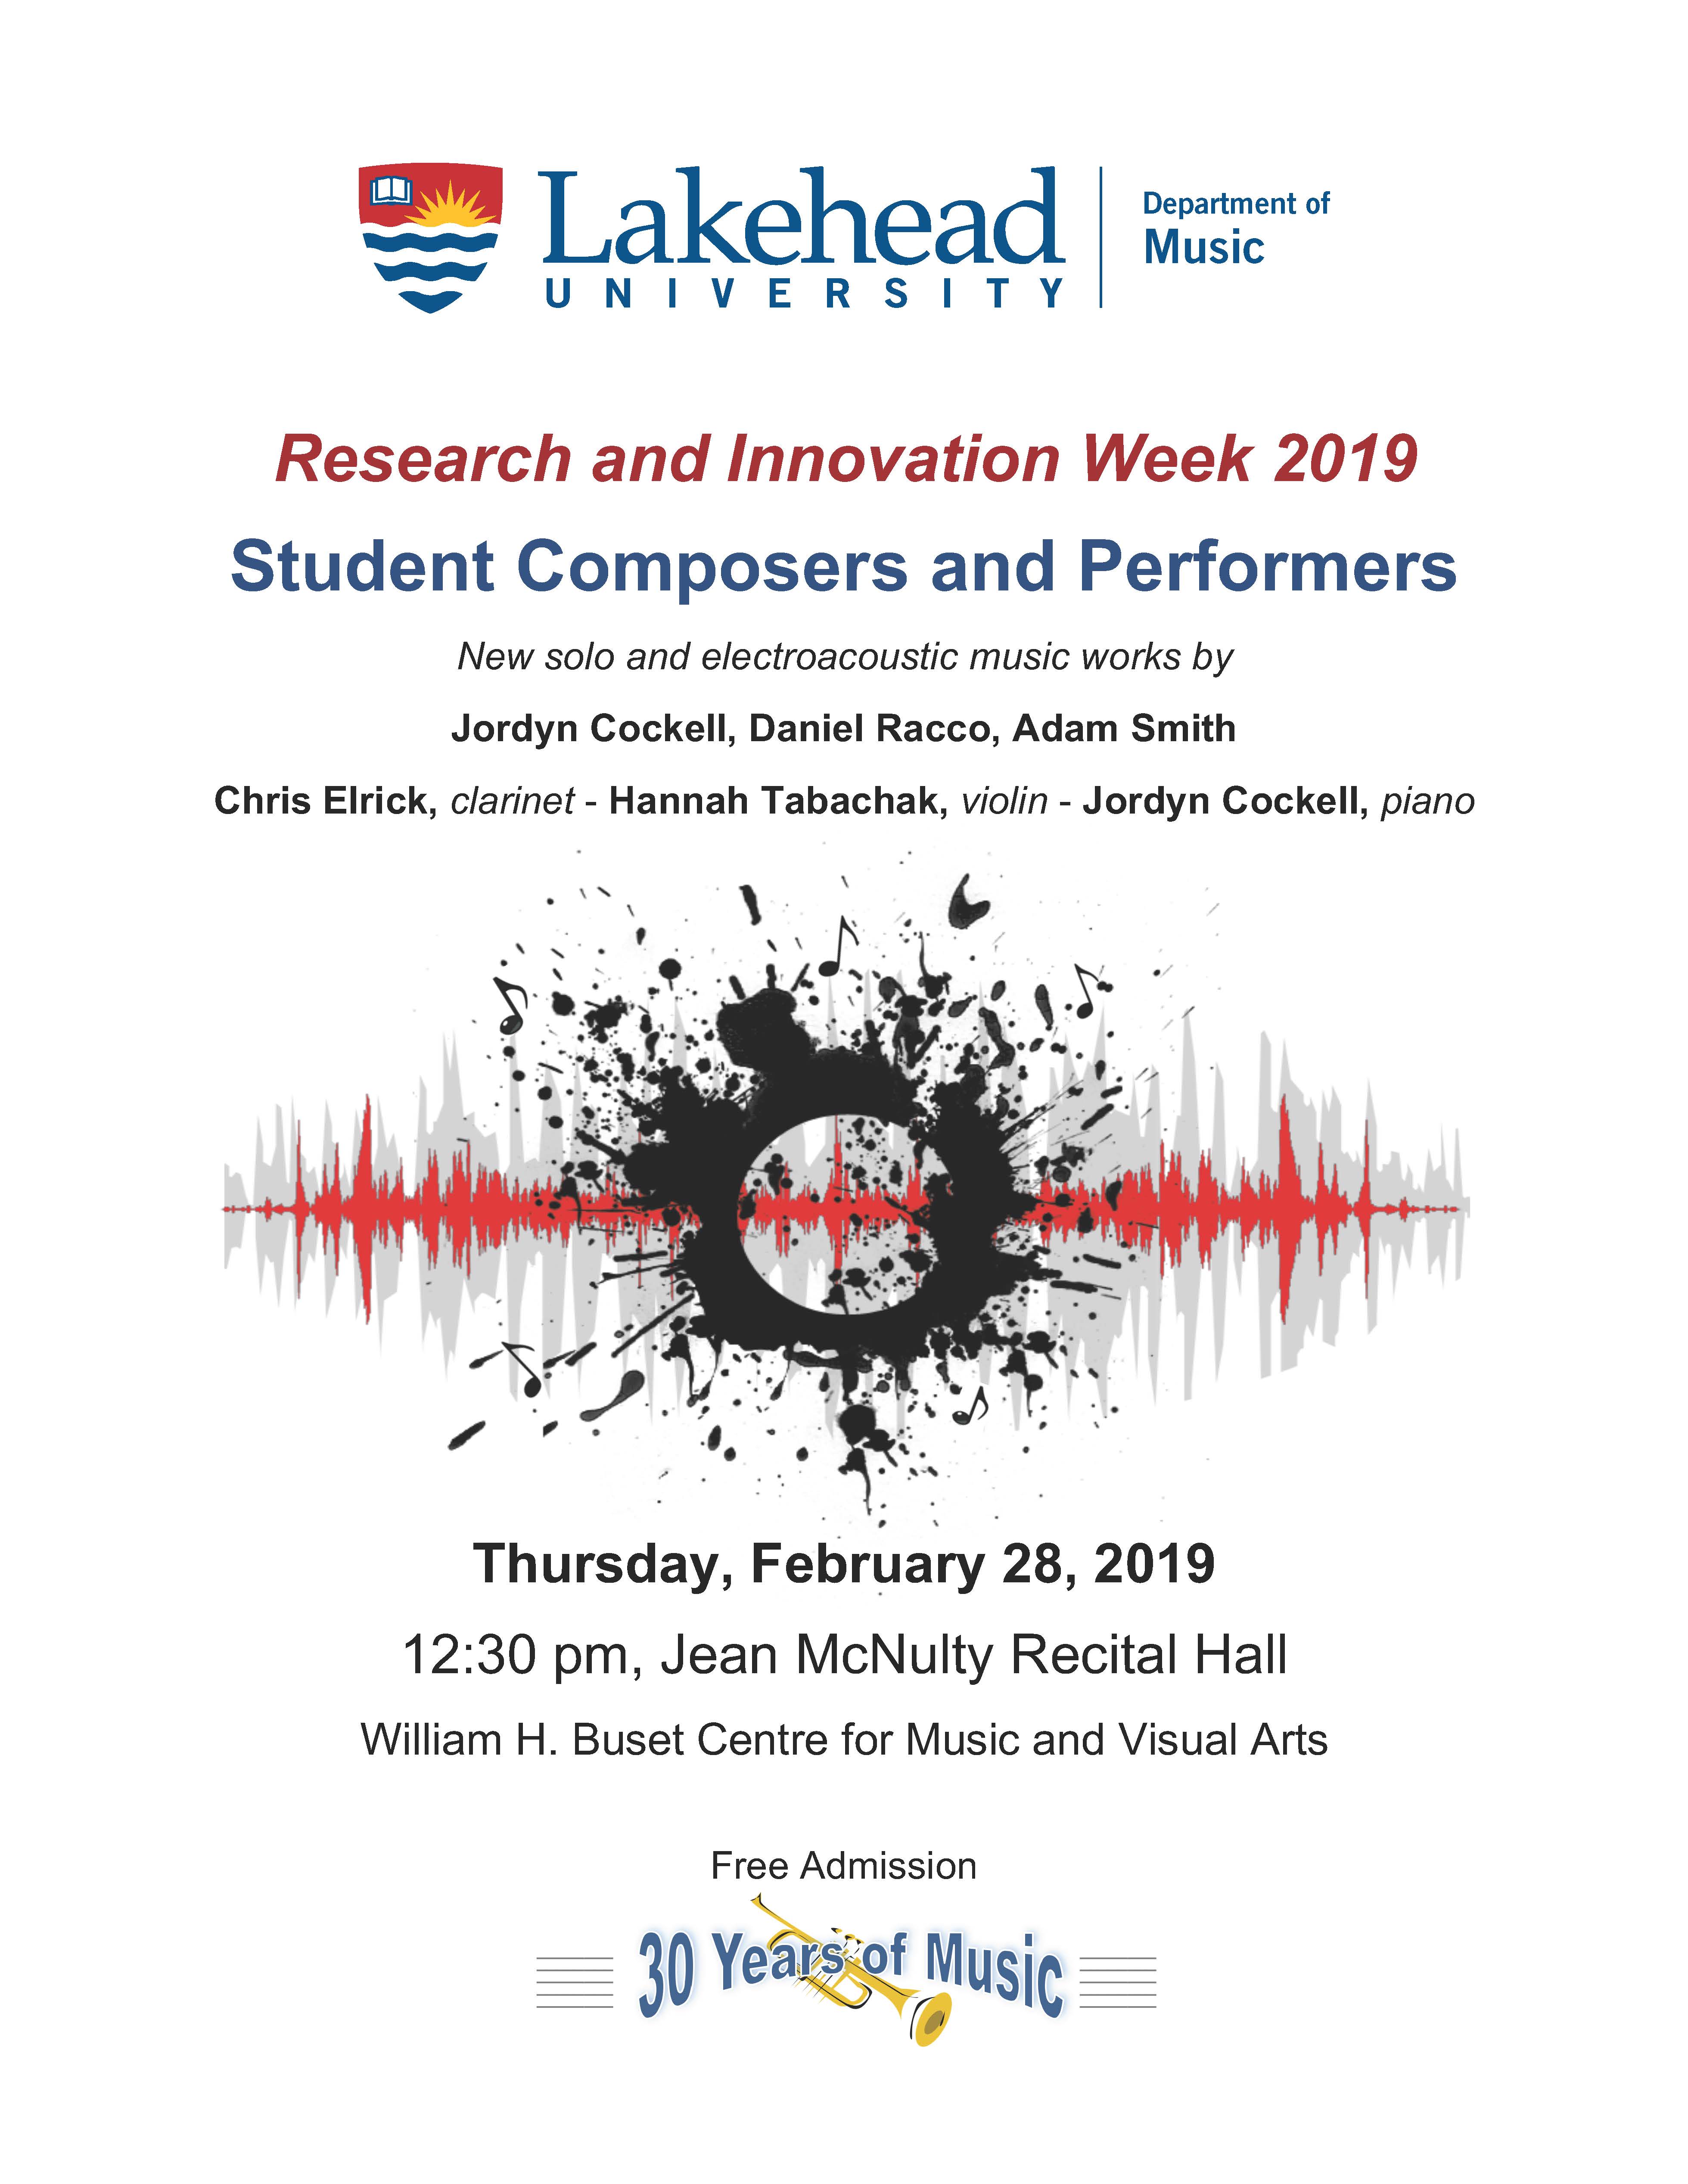 Student Composers and Performers